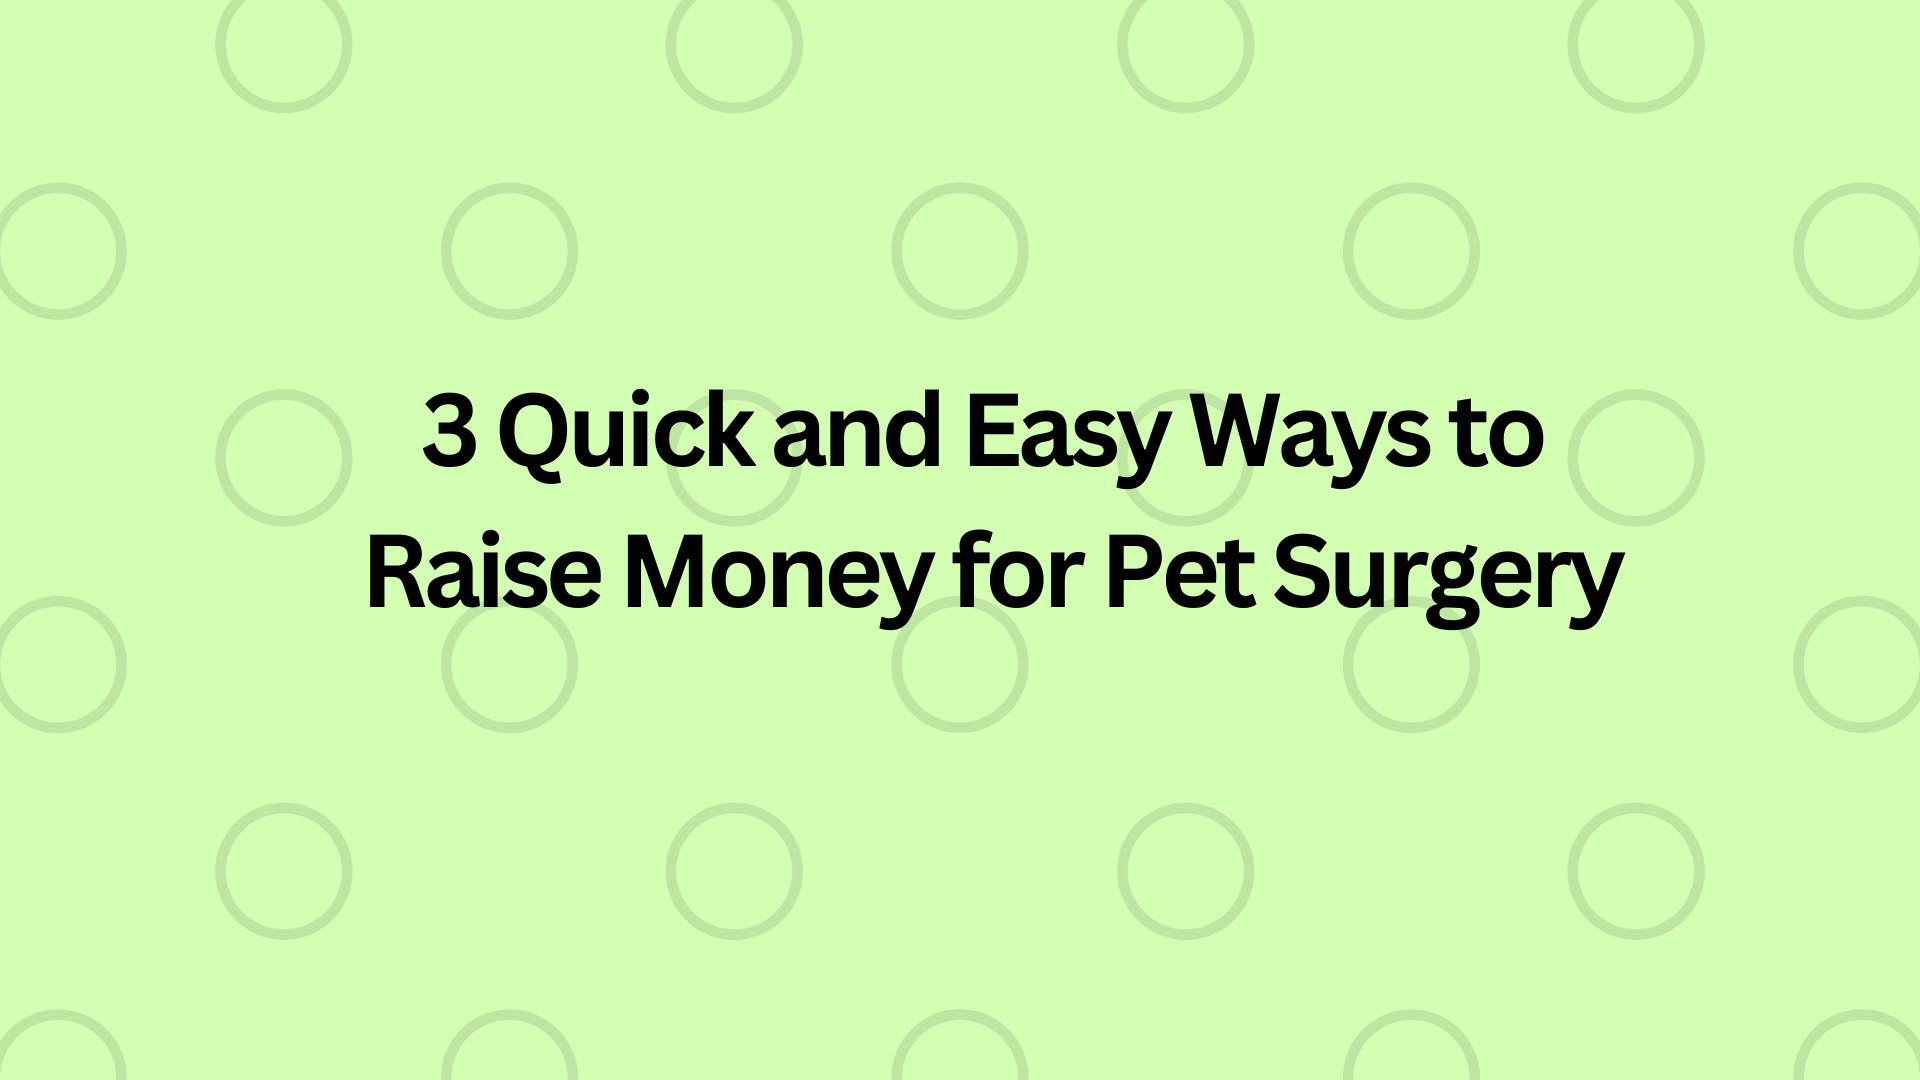 3-Quick-and-Easy-Ways-to-Raise-Money-for-Pet-Surgery-2.png